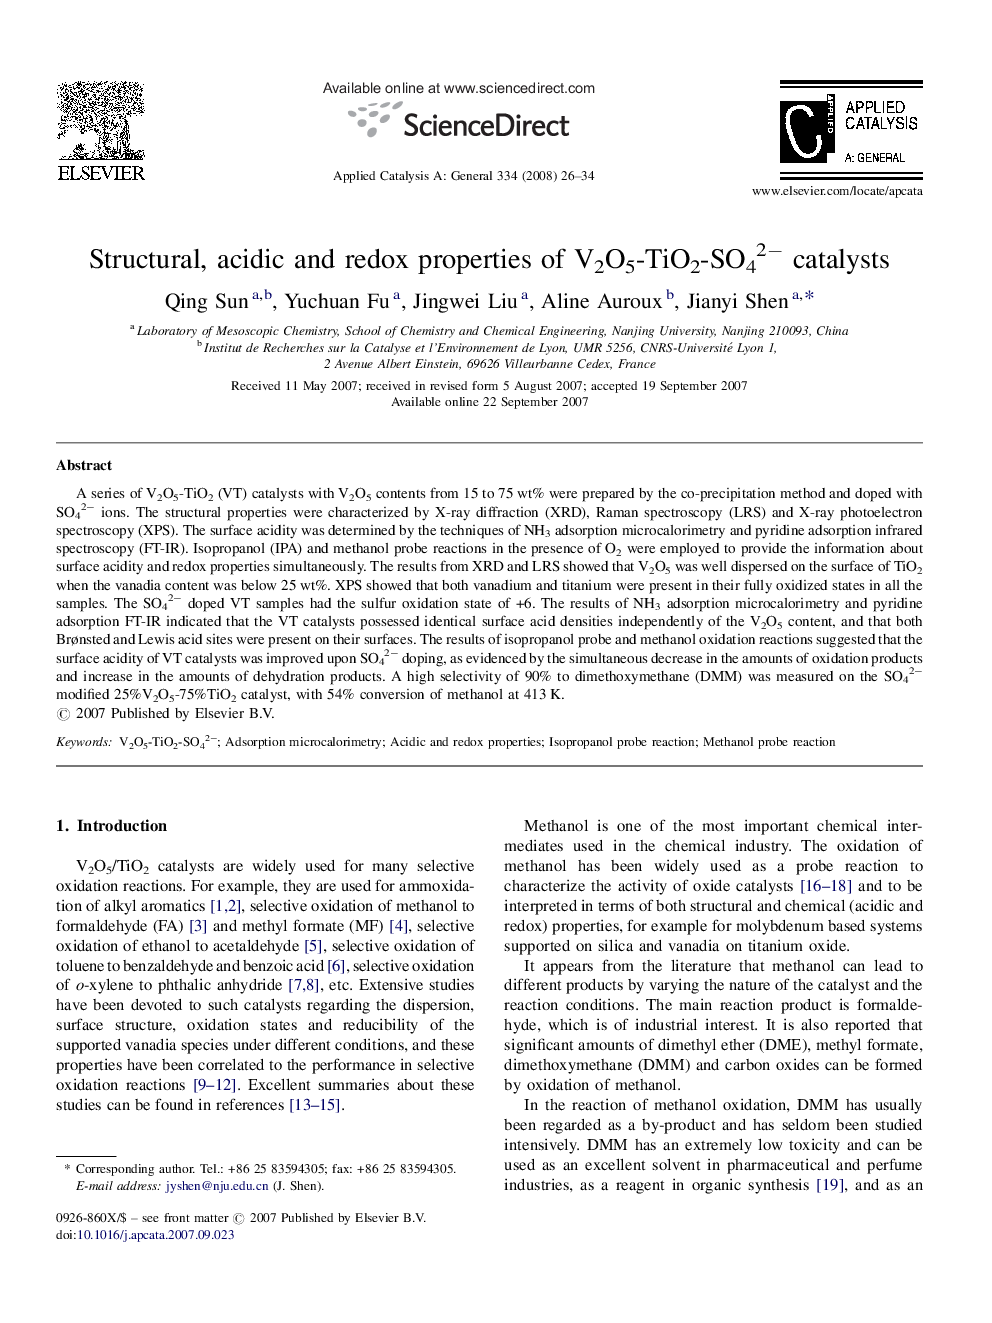 Structural, acidic and redox properties of V2O5-TiO2-SO42− catalysts